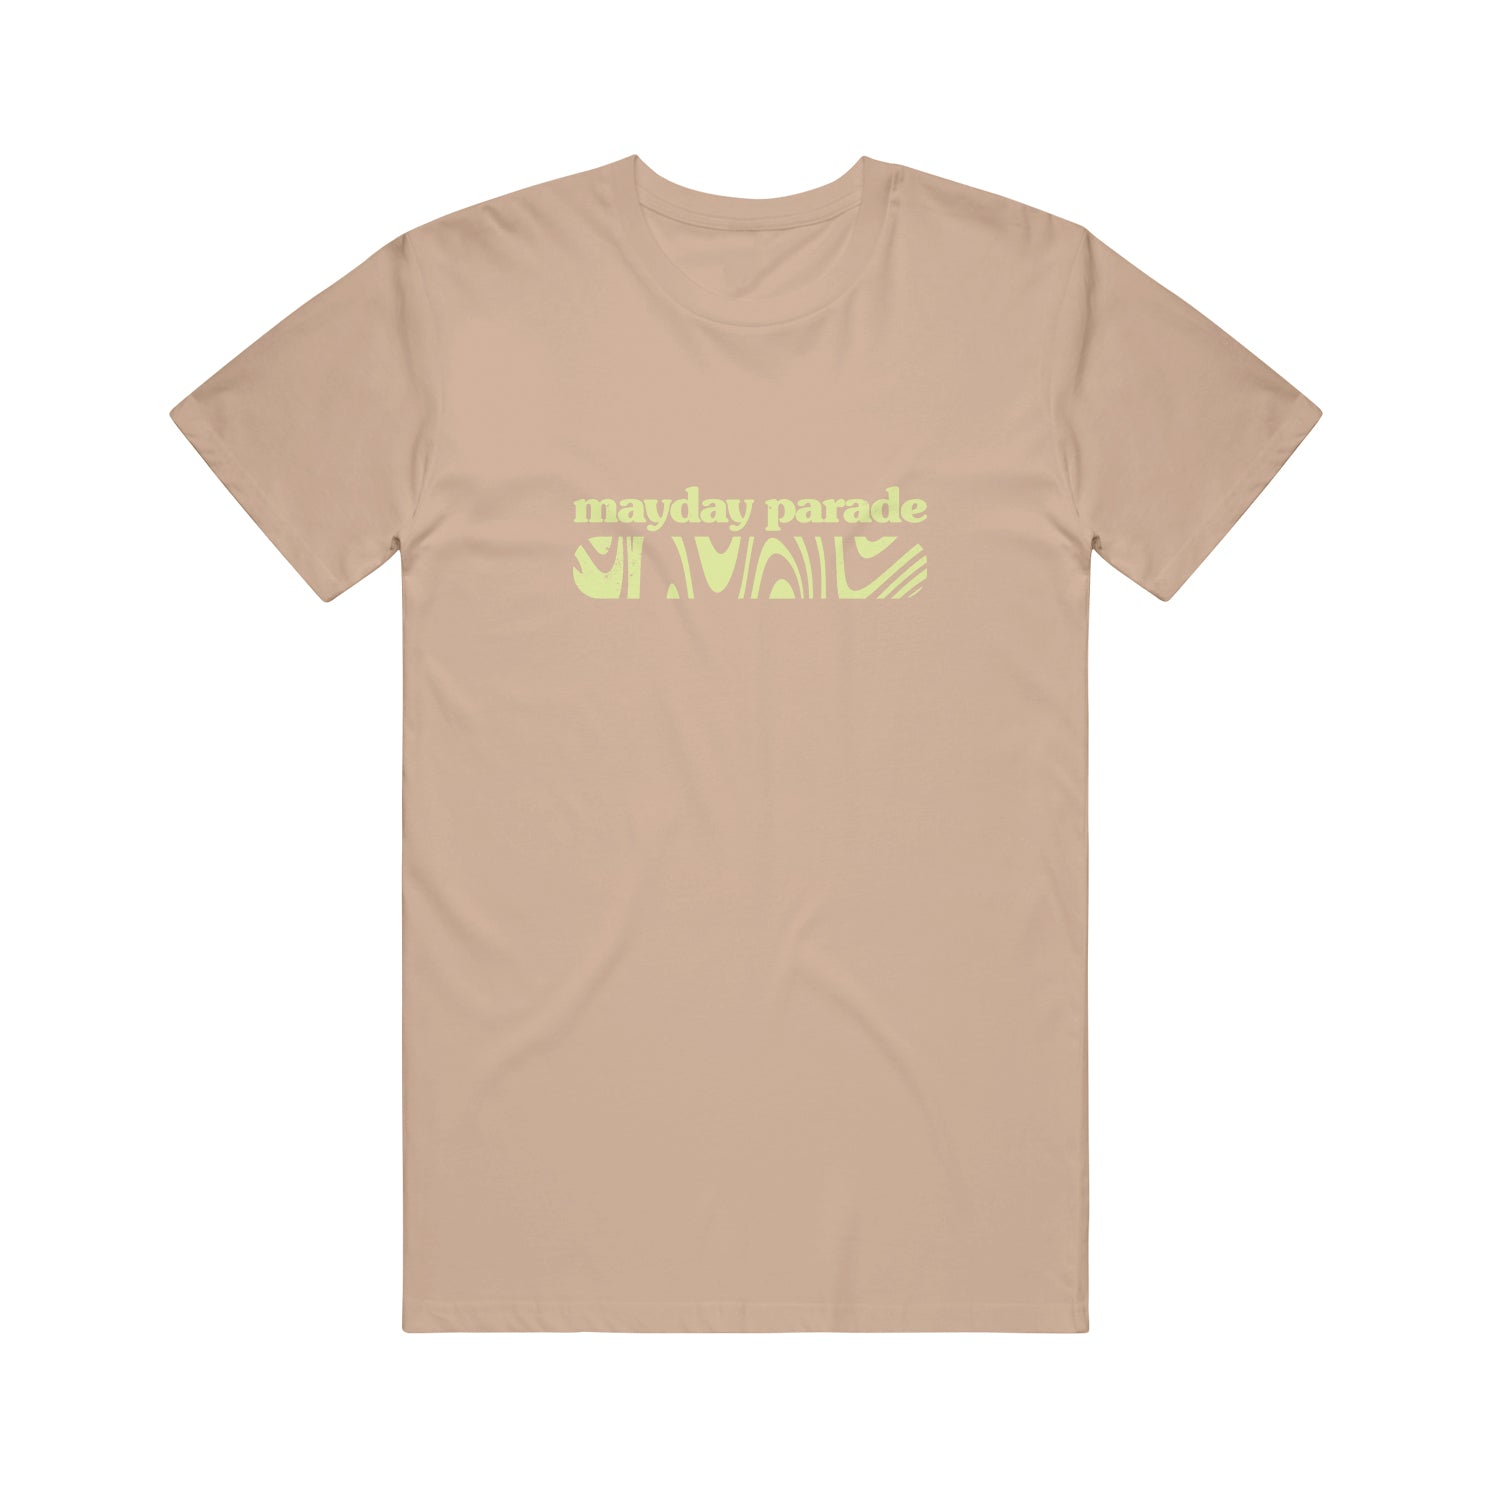 image of a tan tee shirt on a white background. the tee has a chest print in lime green across the chest that says mayday parade with squiggles below.